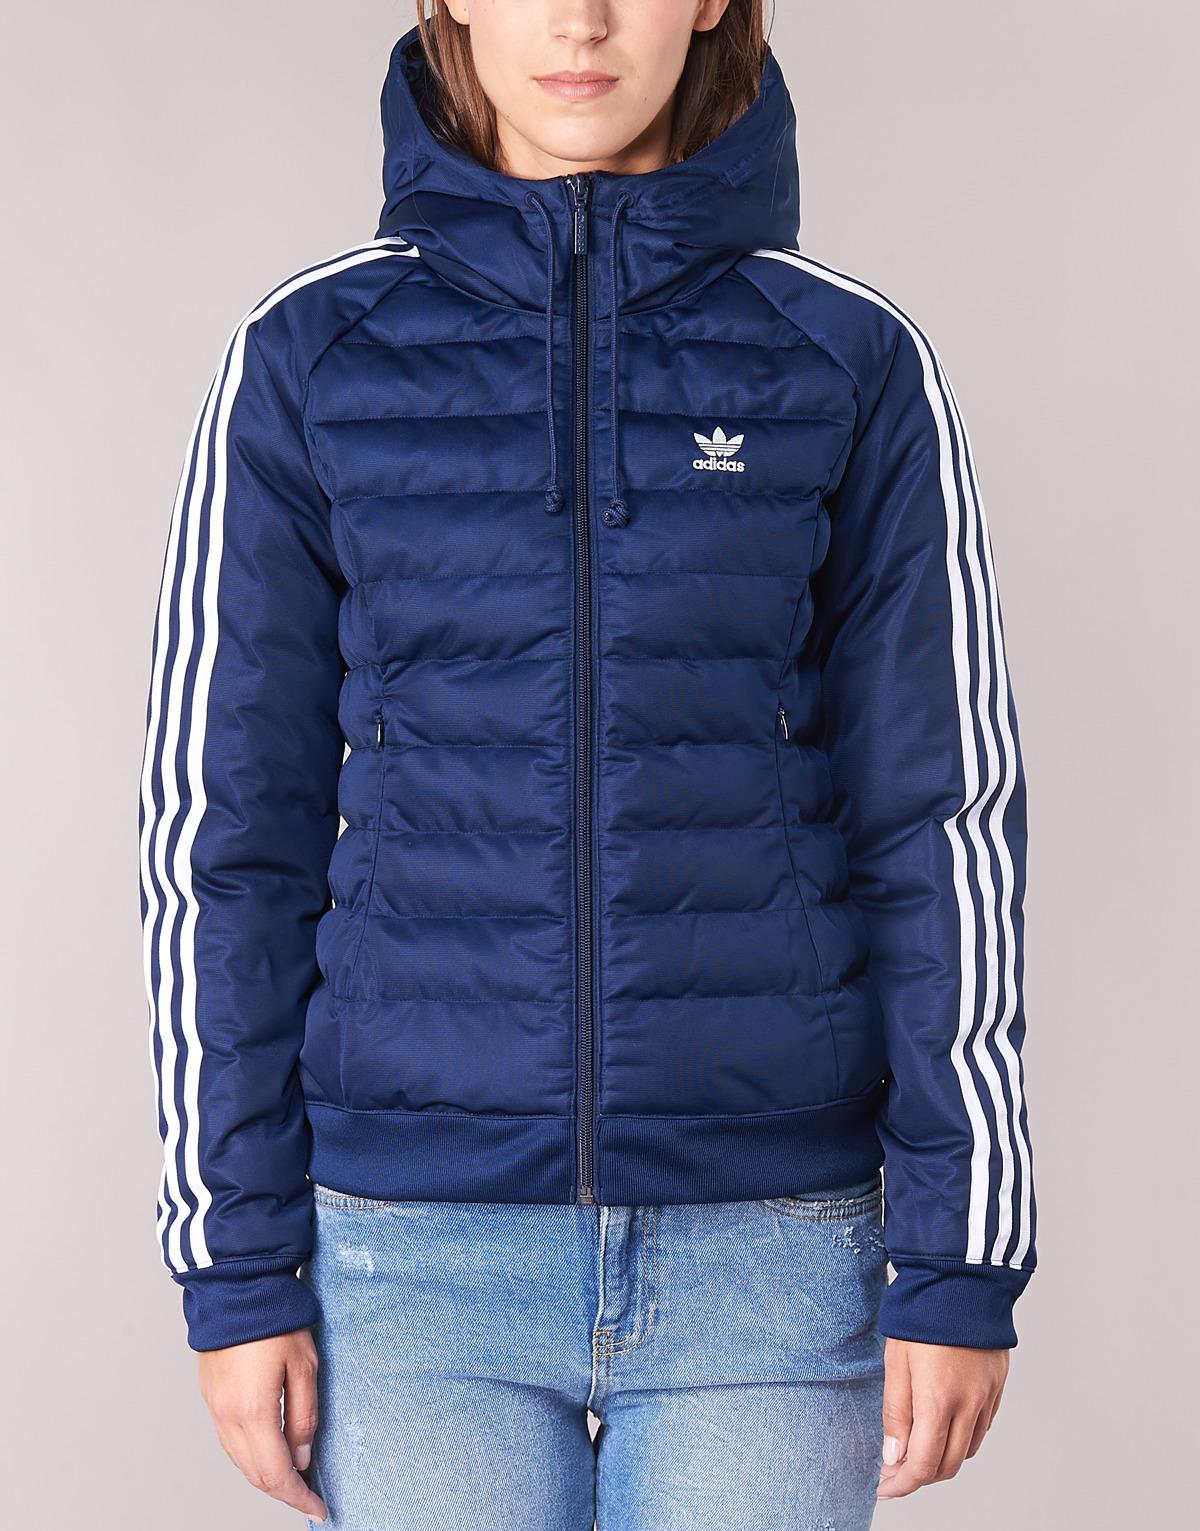 Well educated imply Painkiller slim jacket noir adidas Stop by to know  Theseus song